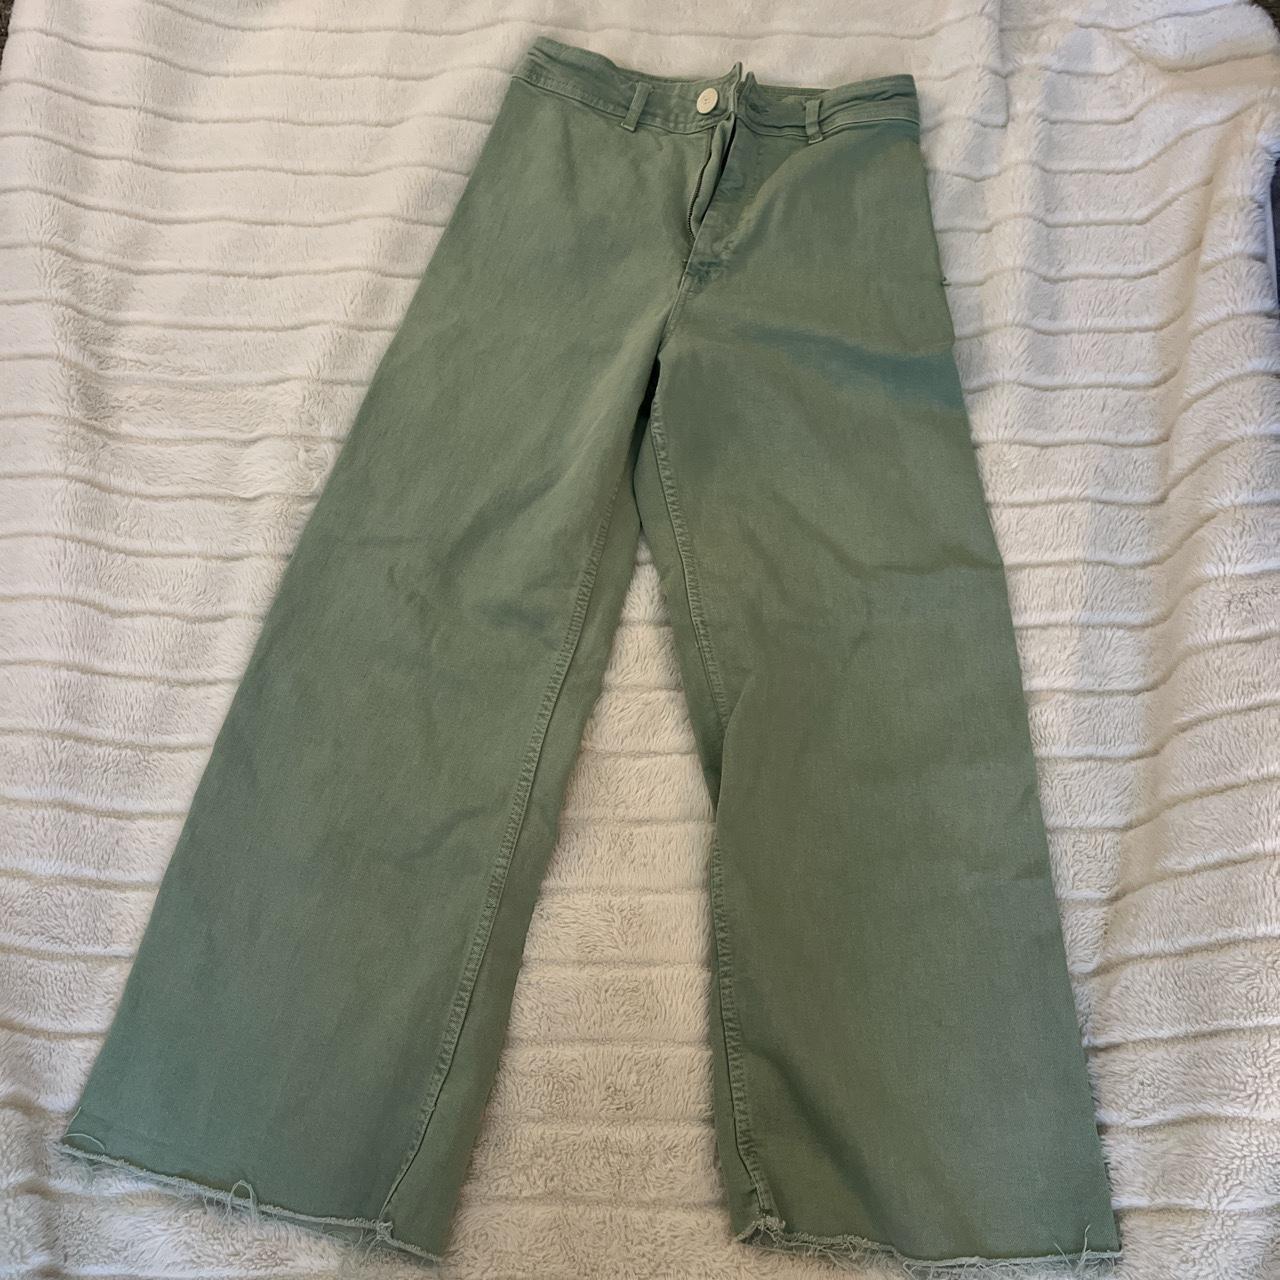 zara green jeans, only worn these once these are in... - Depop